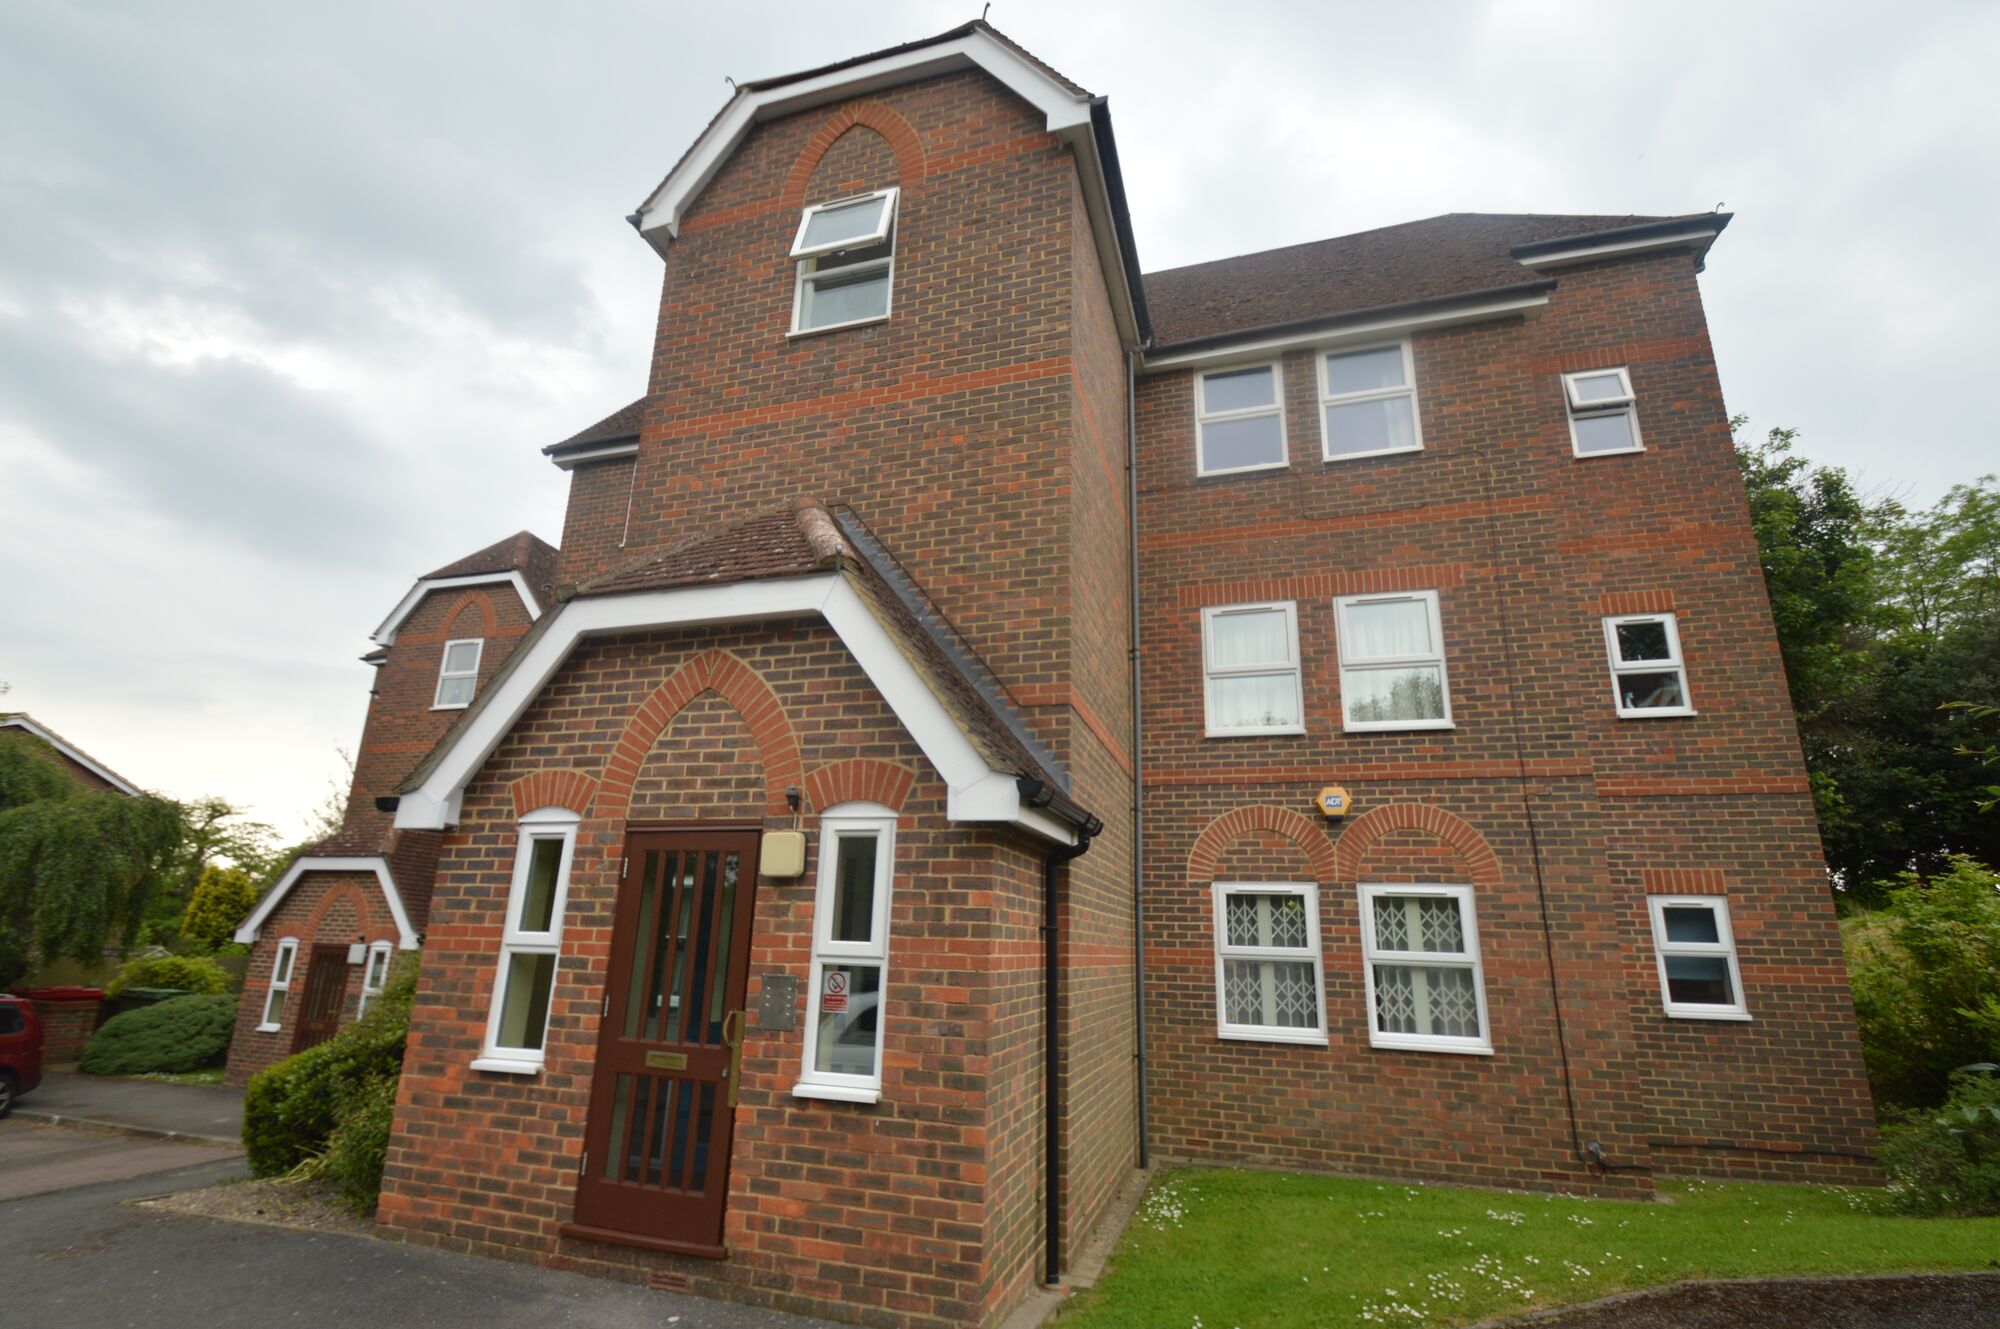 3 bedroom  flat to rent, Available now Malmers Well Road, High Wycombe, HP13, main image